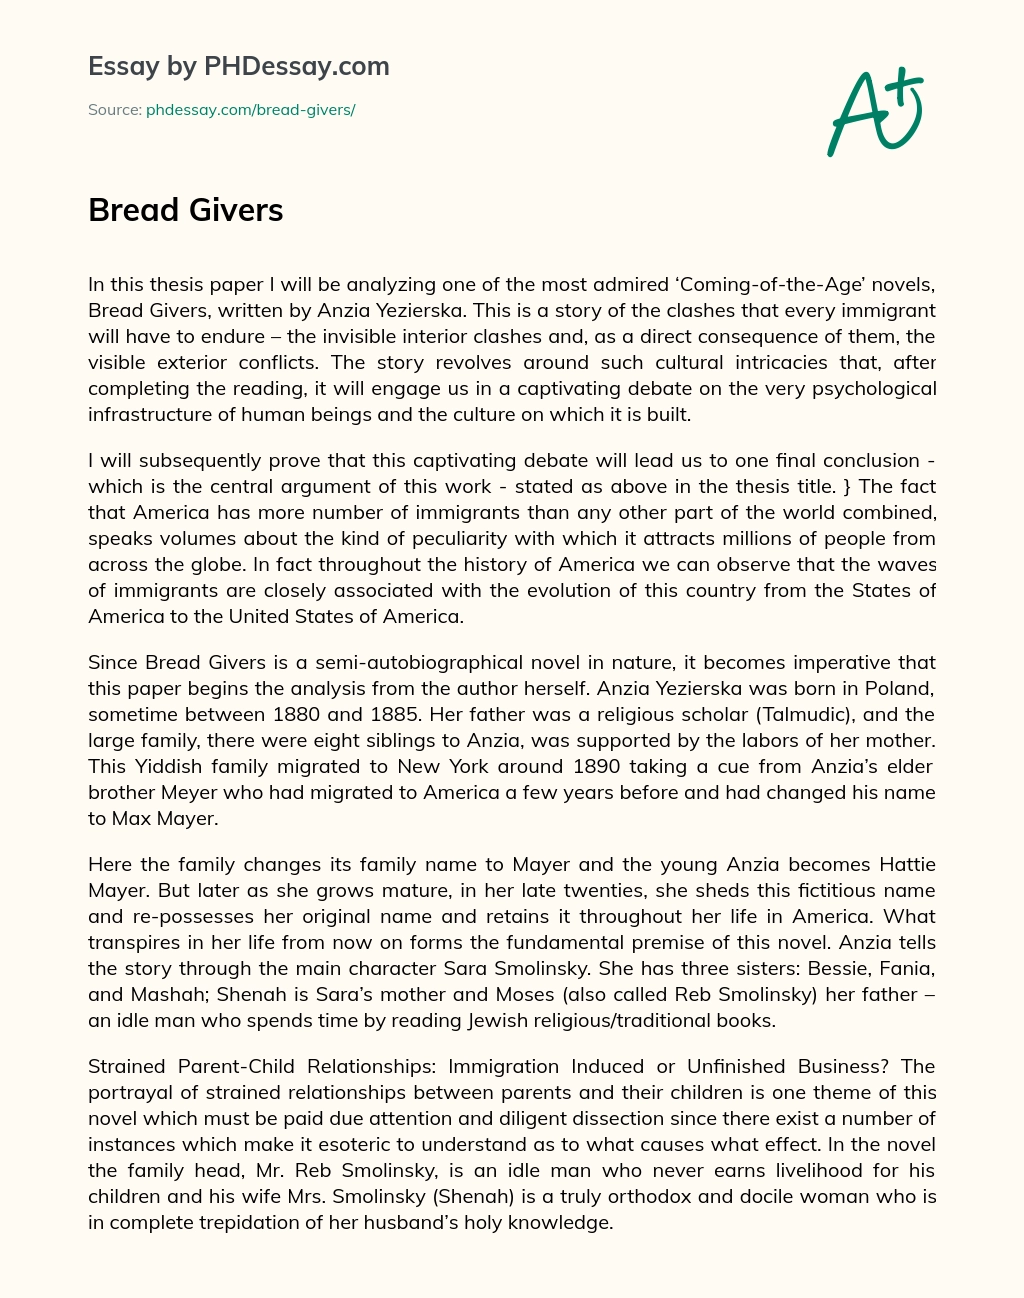 Bread Givers essay